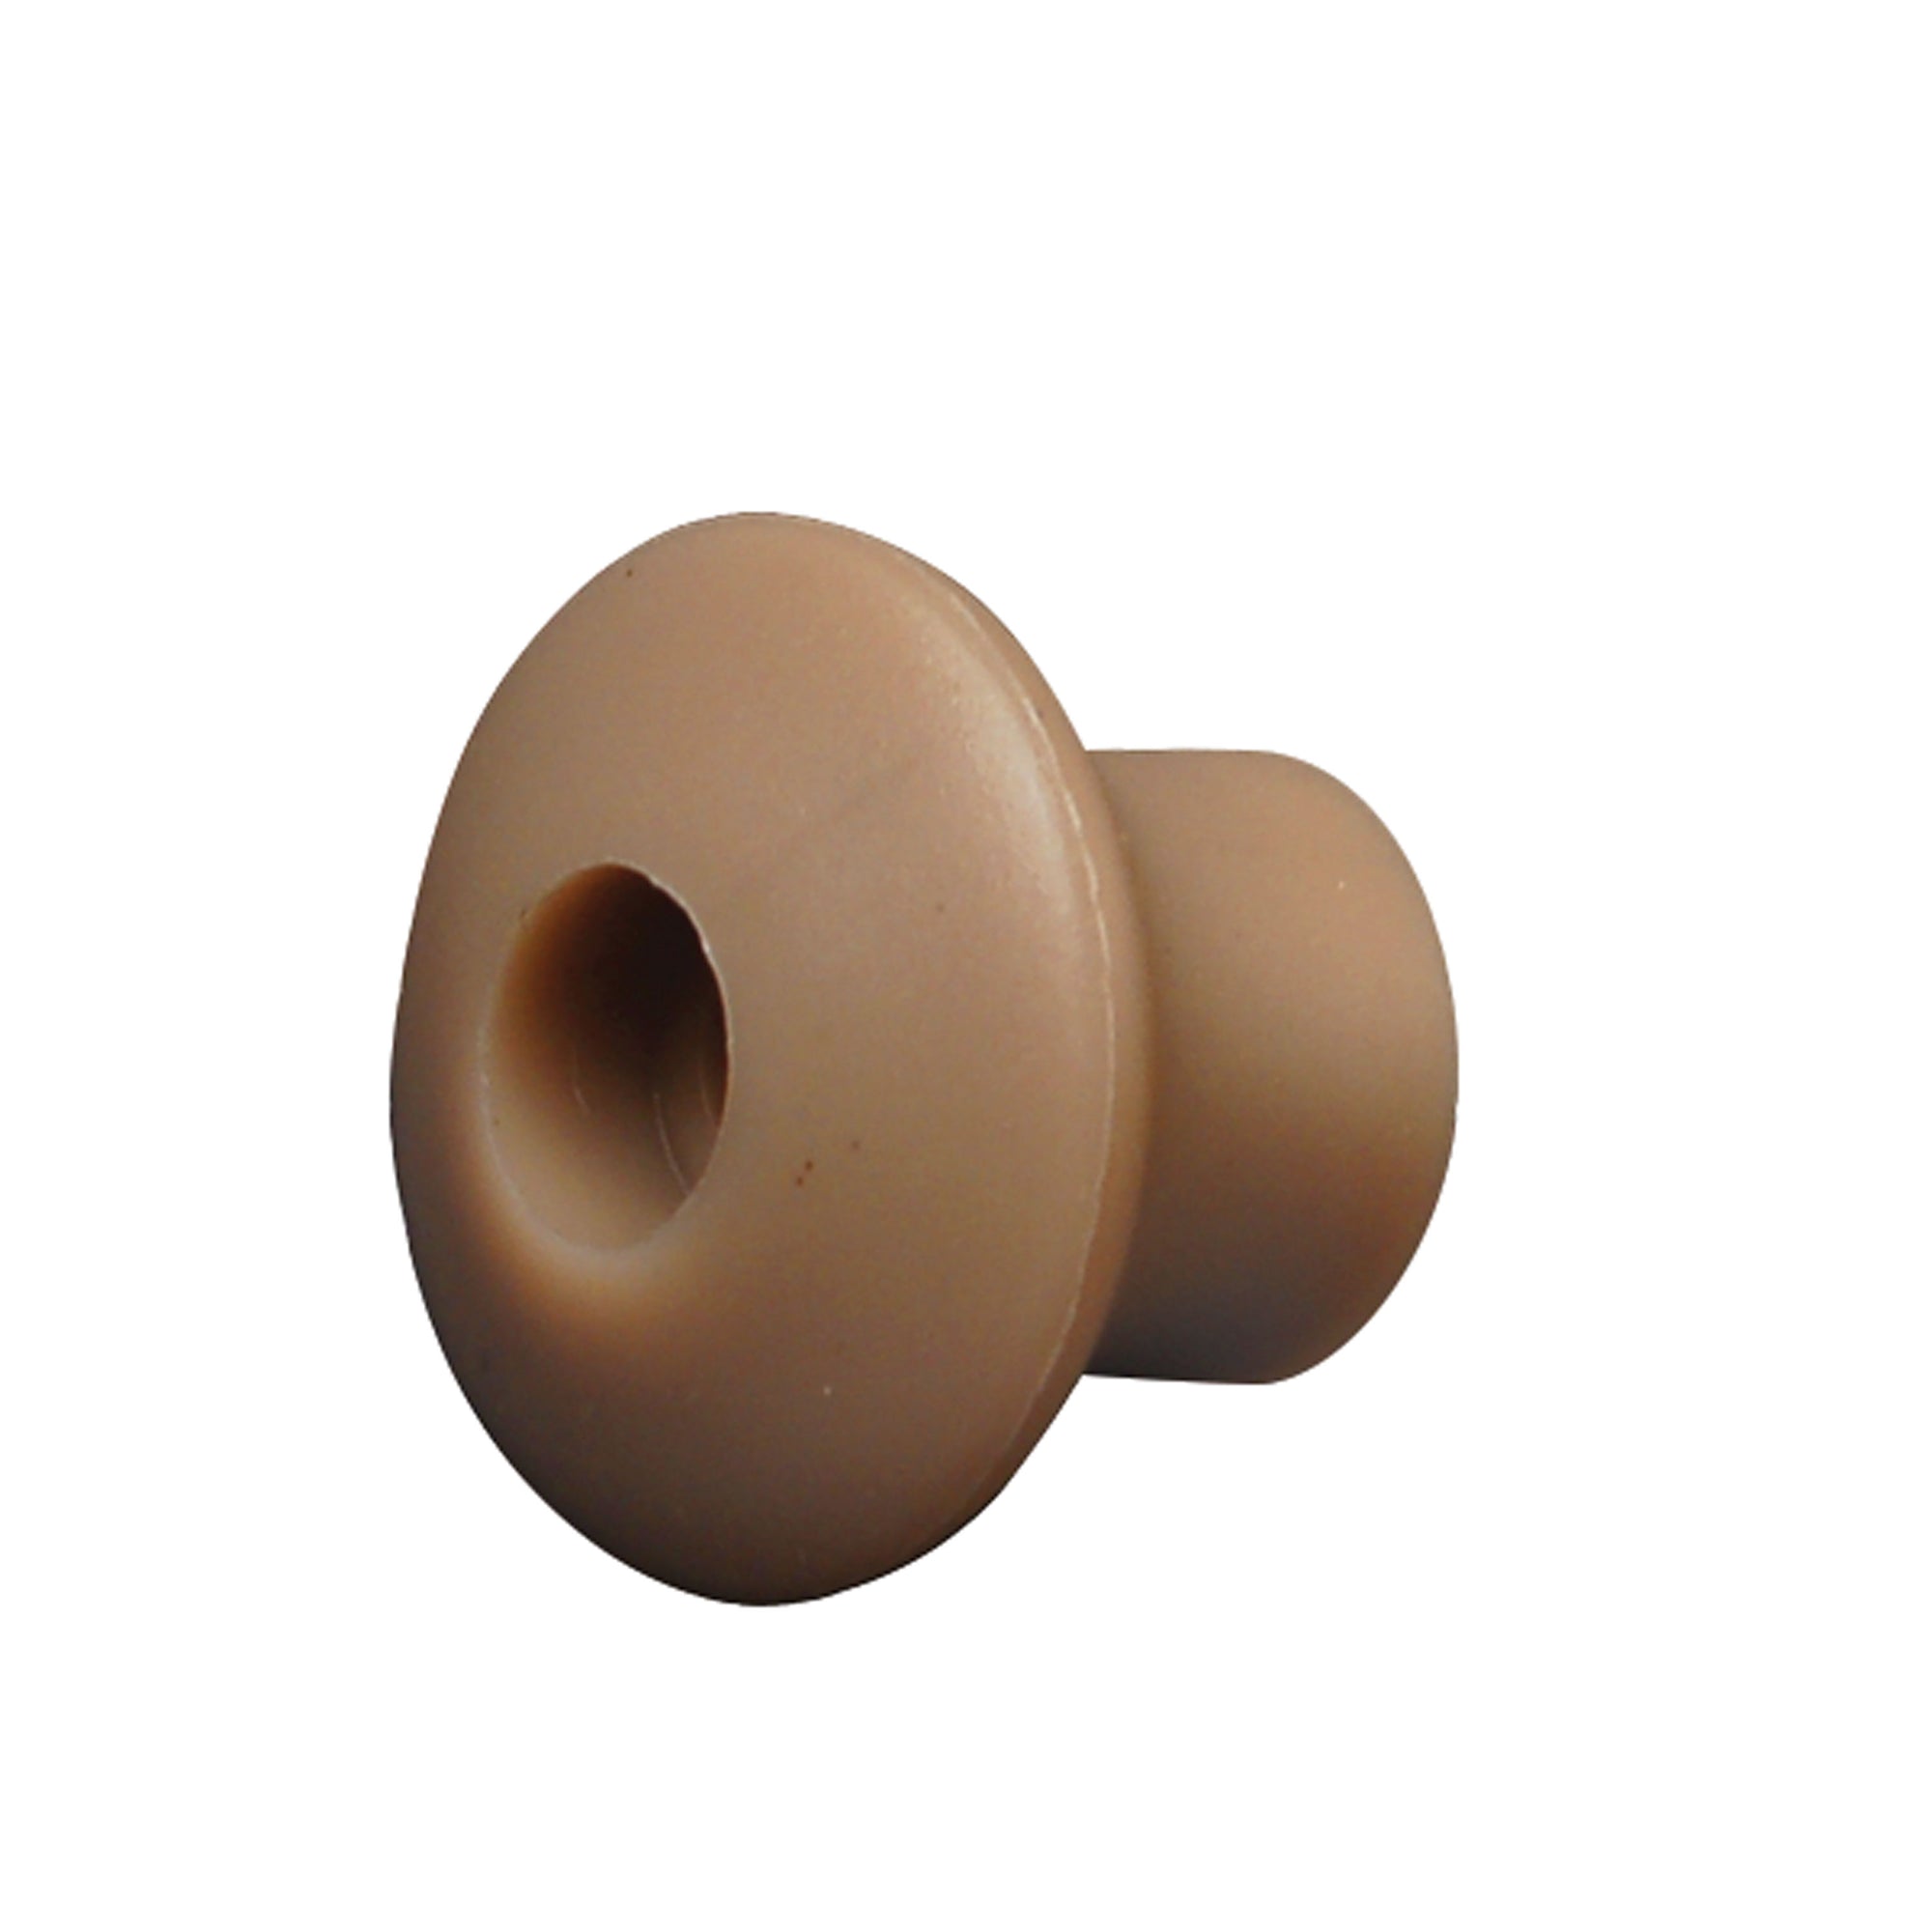 RV Designer A315 Pleated Shade Knob - Tan, Pack of 4